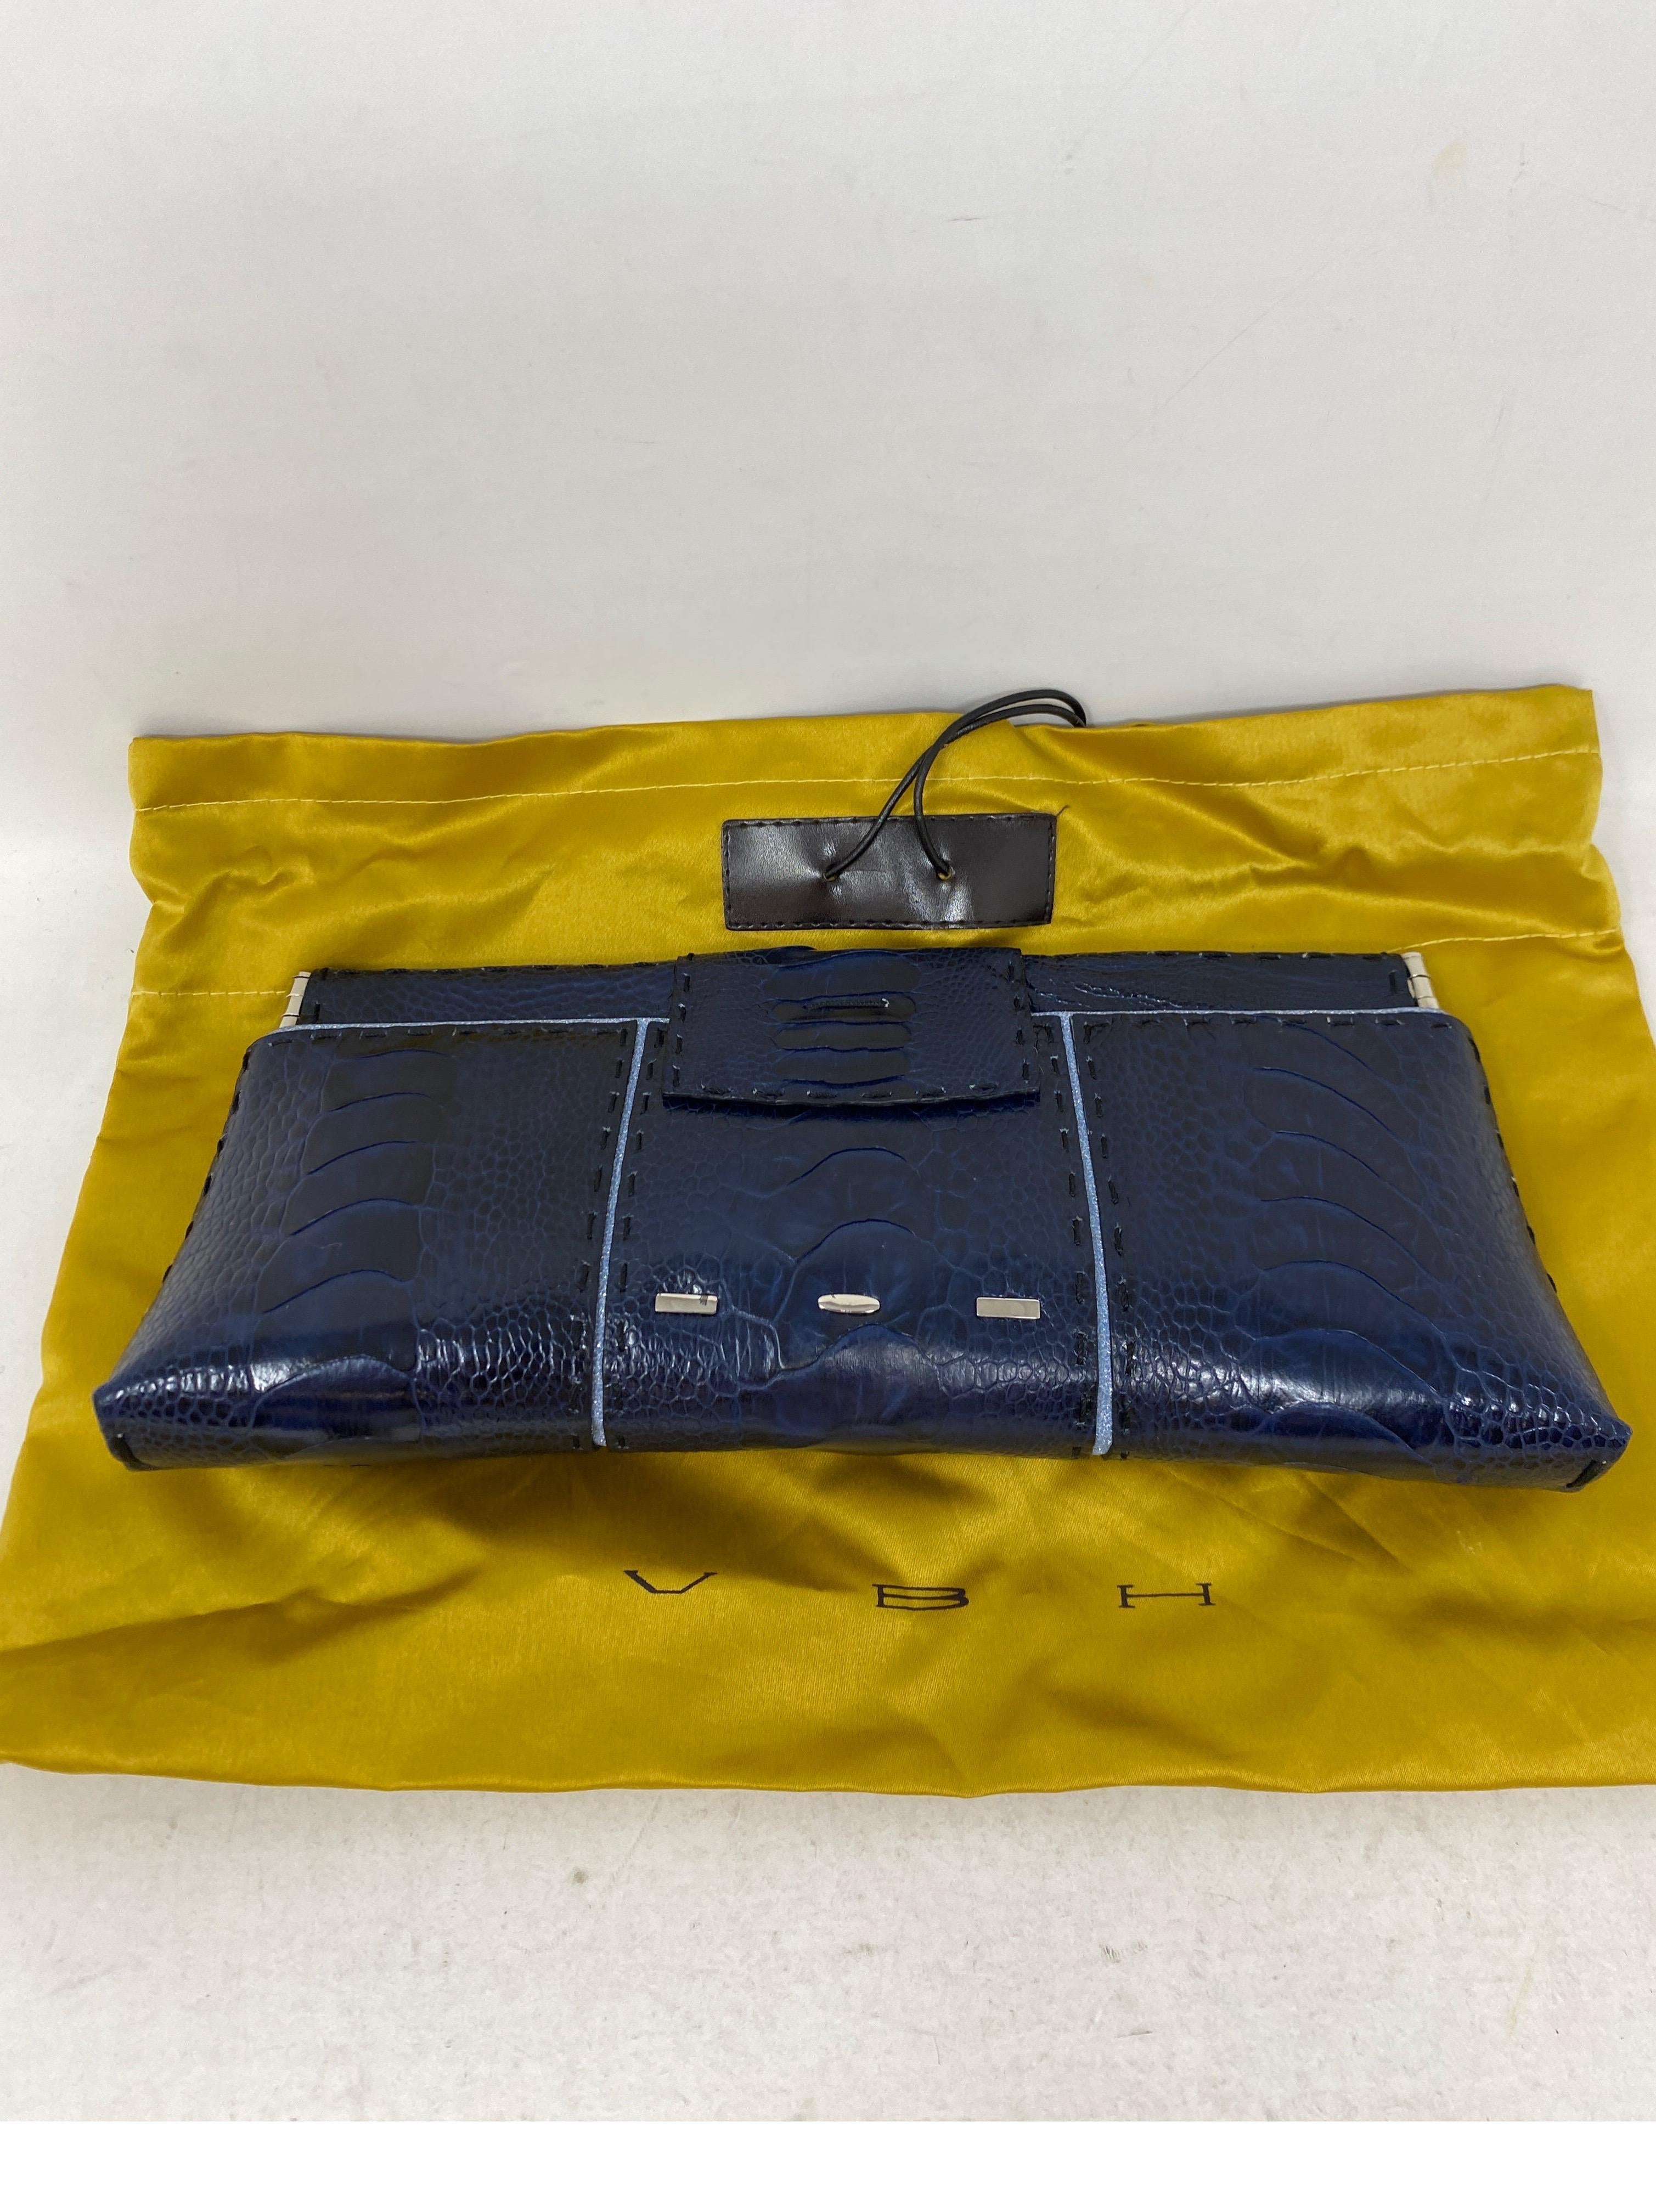 VBH Exotic Alligator Clutch Bag. Beautiful blue alligator clutch hand-stitched. Numbered piece. Limited edition. Collector's piece. Includes VBH dust cover. Pristine condition. Like new. Guaranteed authentic. 